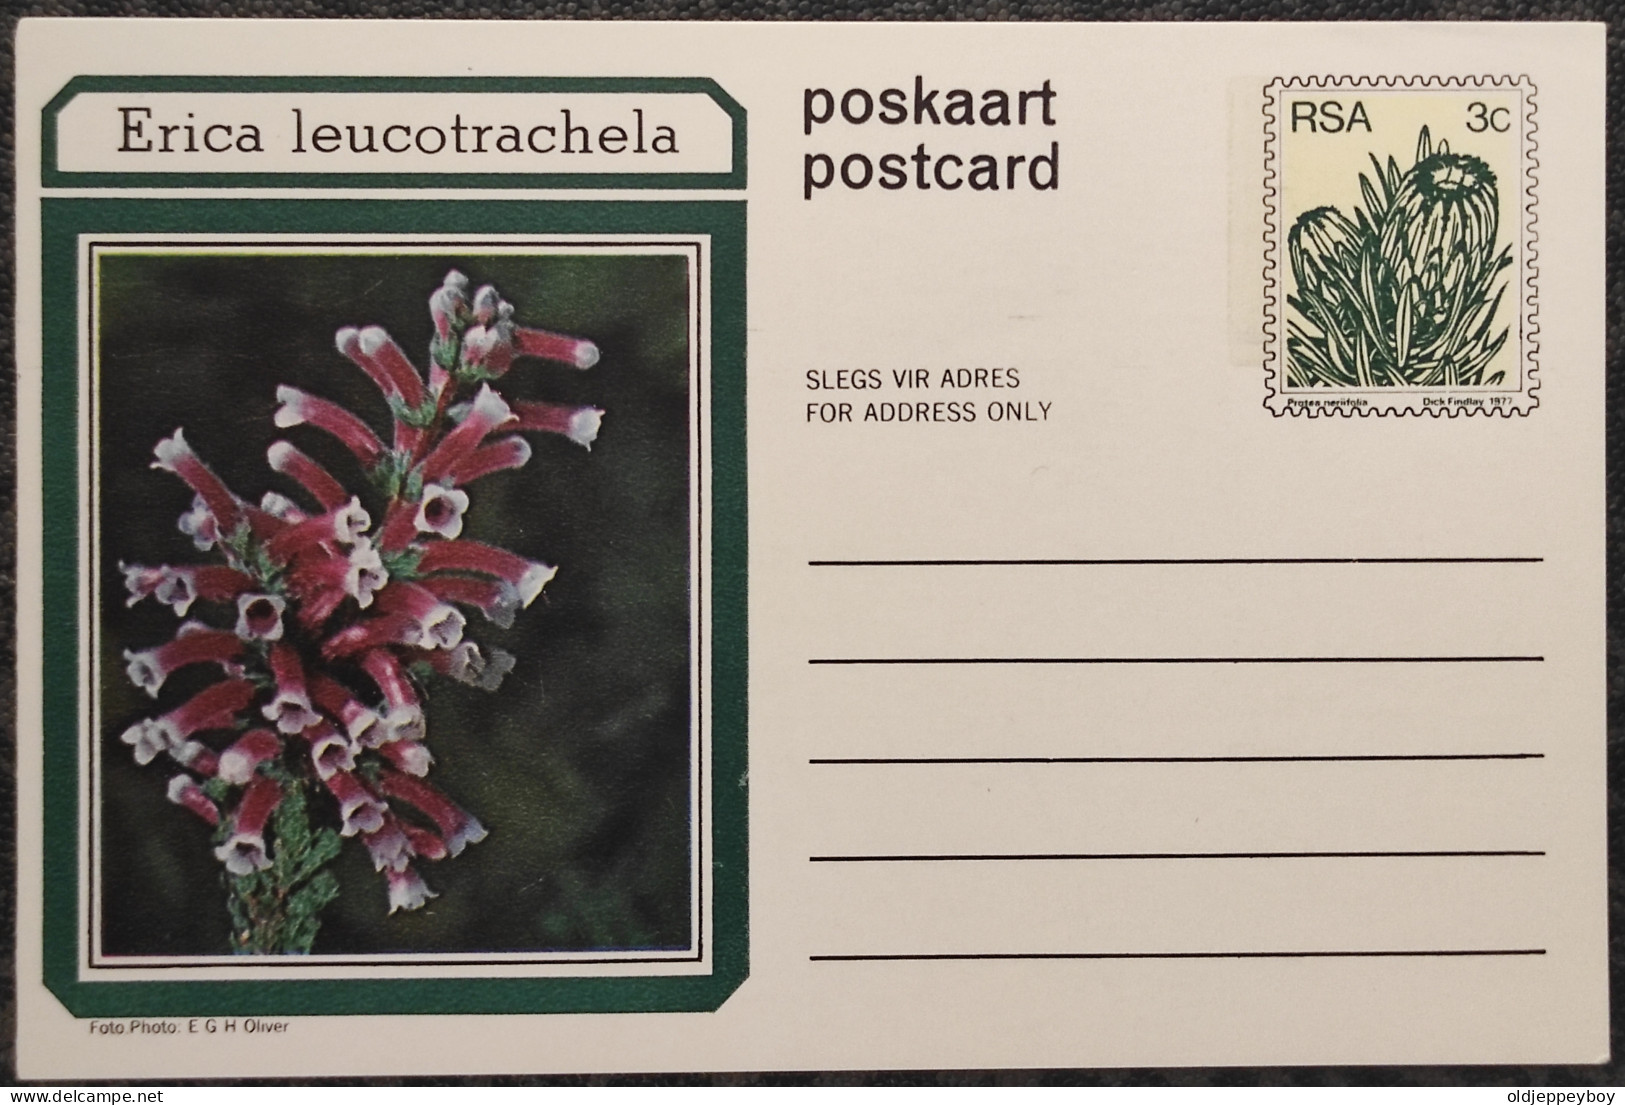 3c SOUTH AFRICA Postal STATIONERY CARD Illus ERICA Leucotrachela FLOWER Cover Stamps Flowers Rsa - Storia Postale